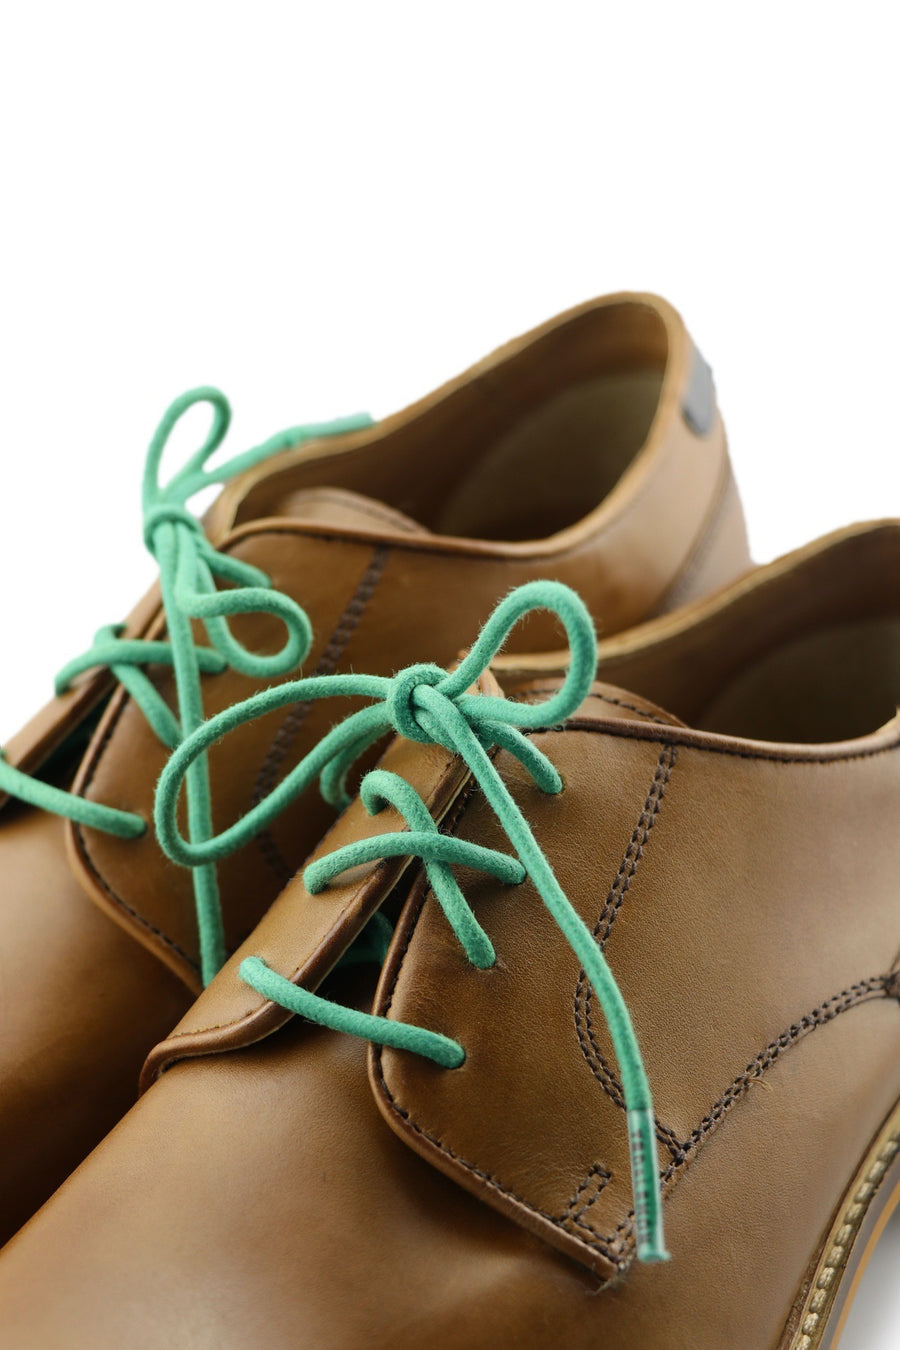 Shoe Laces Mint Leaves Waxed Cotton Ted and Lemon